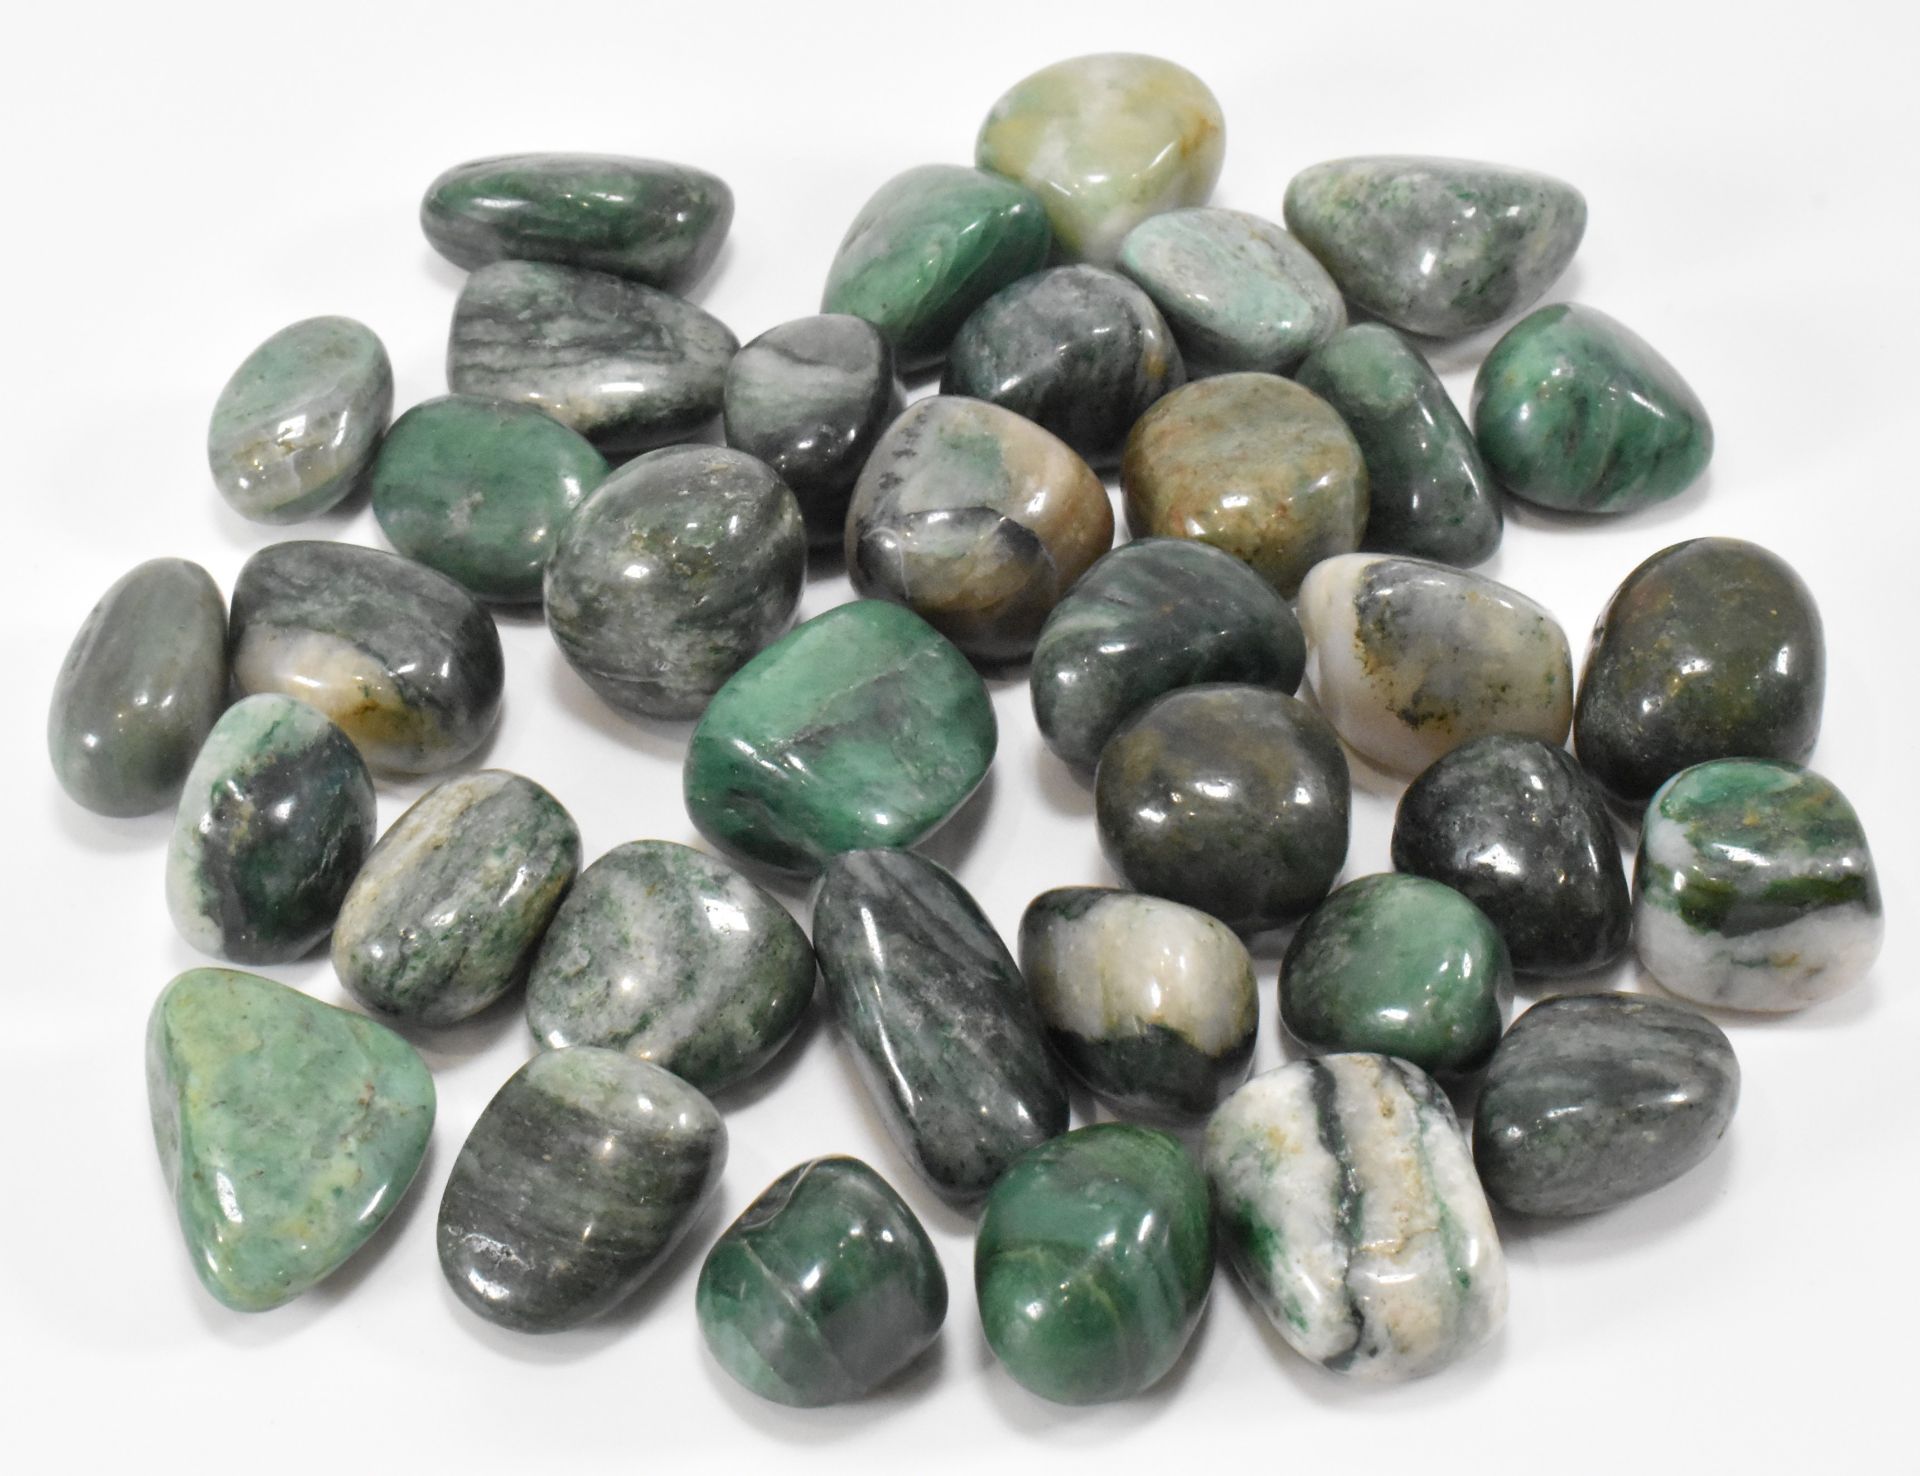 MINERAL SPECIMENS - COLLECTION OF AFRICAN JADE